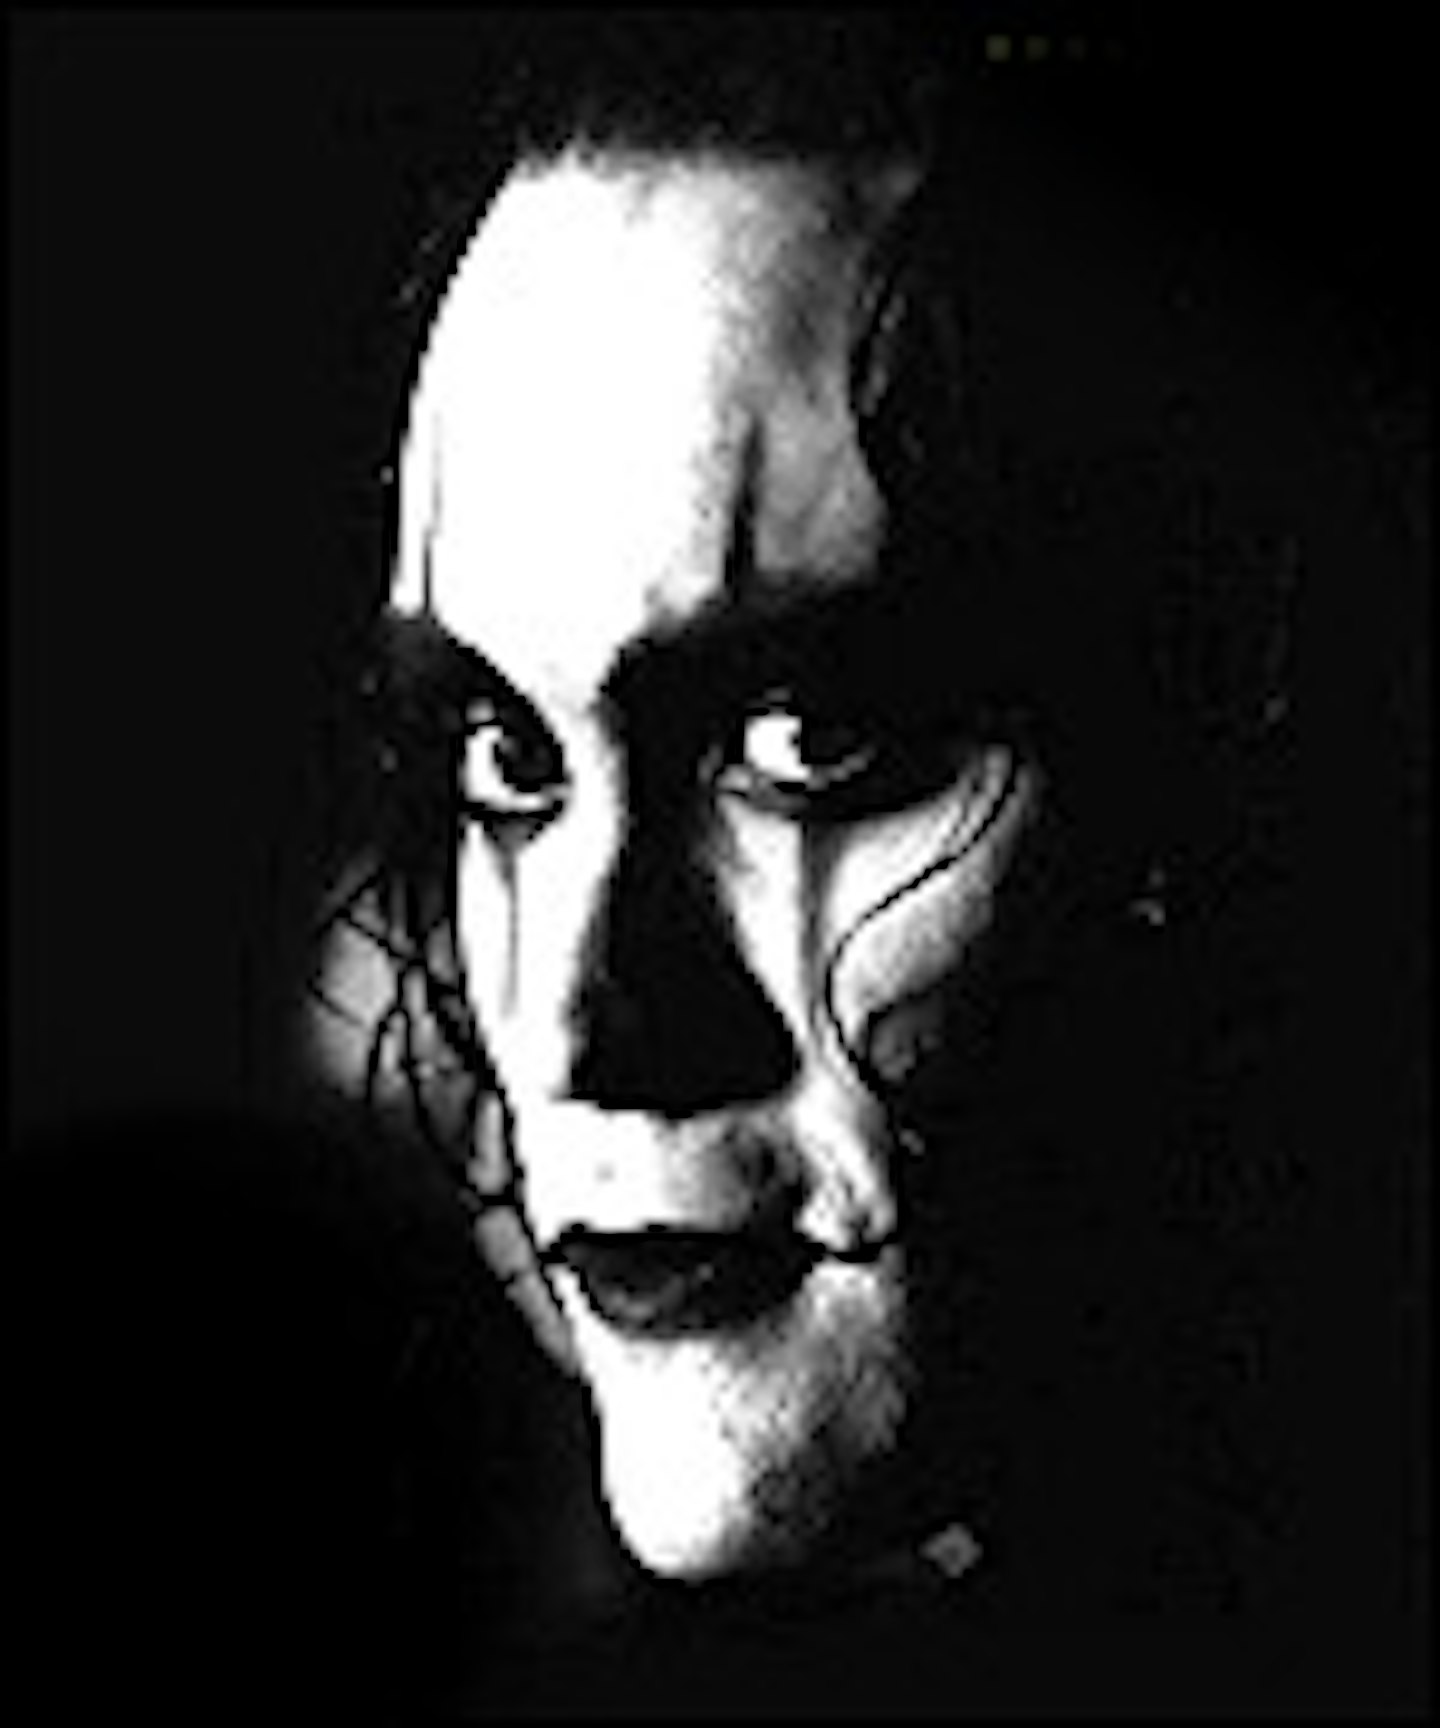 Fresnadillo To Direct The Crow?